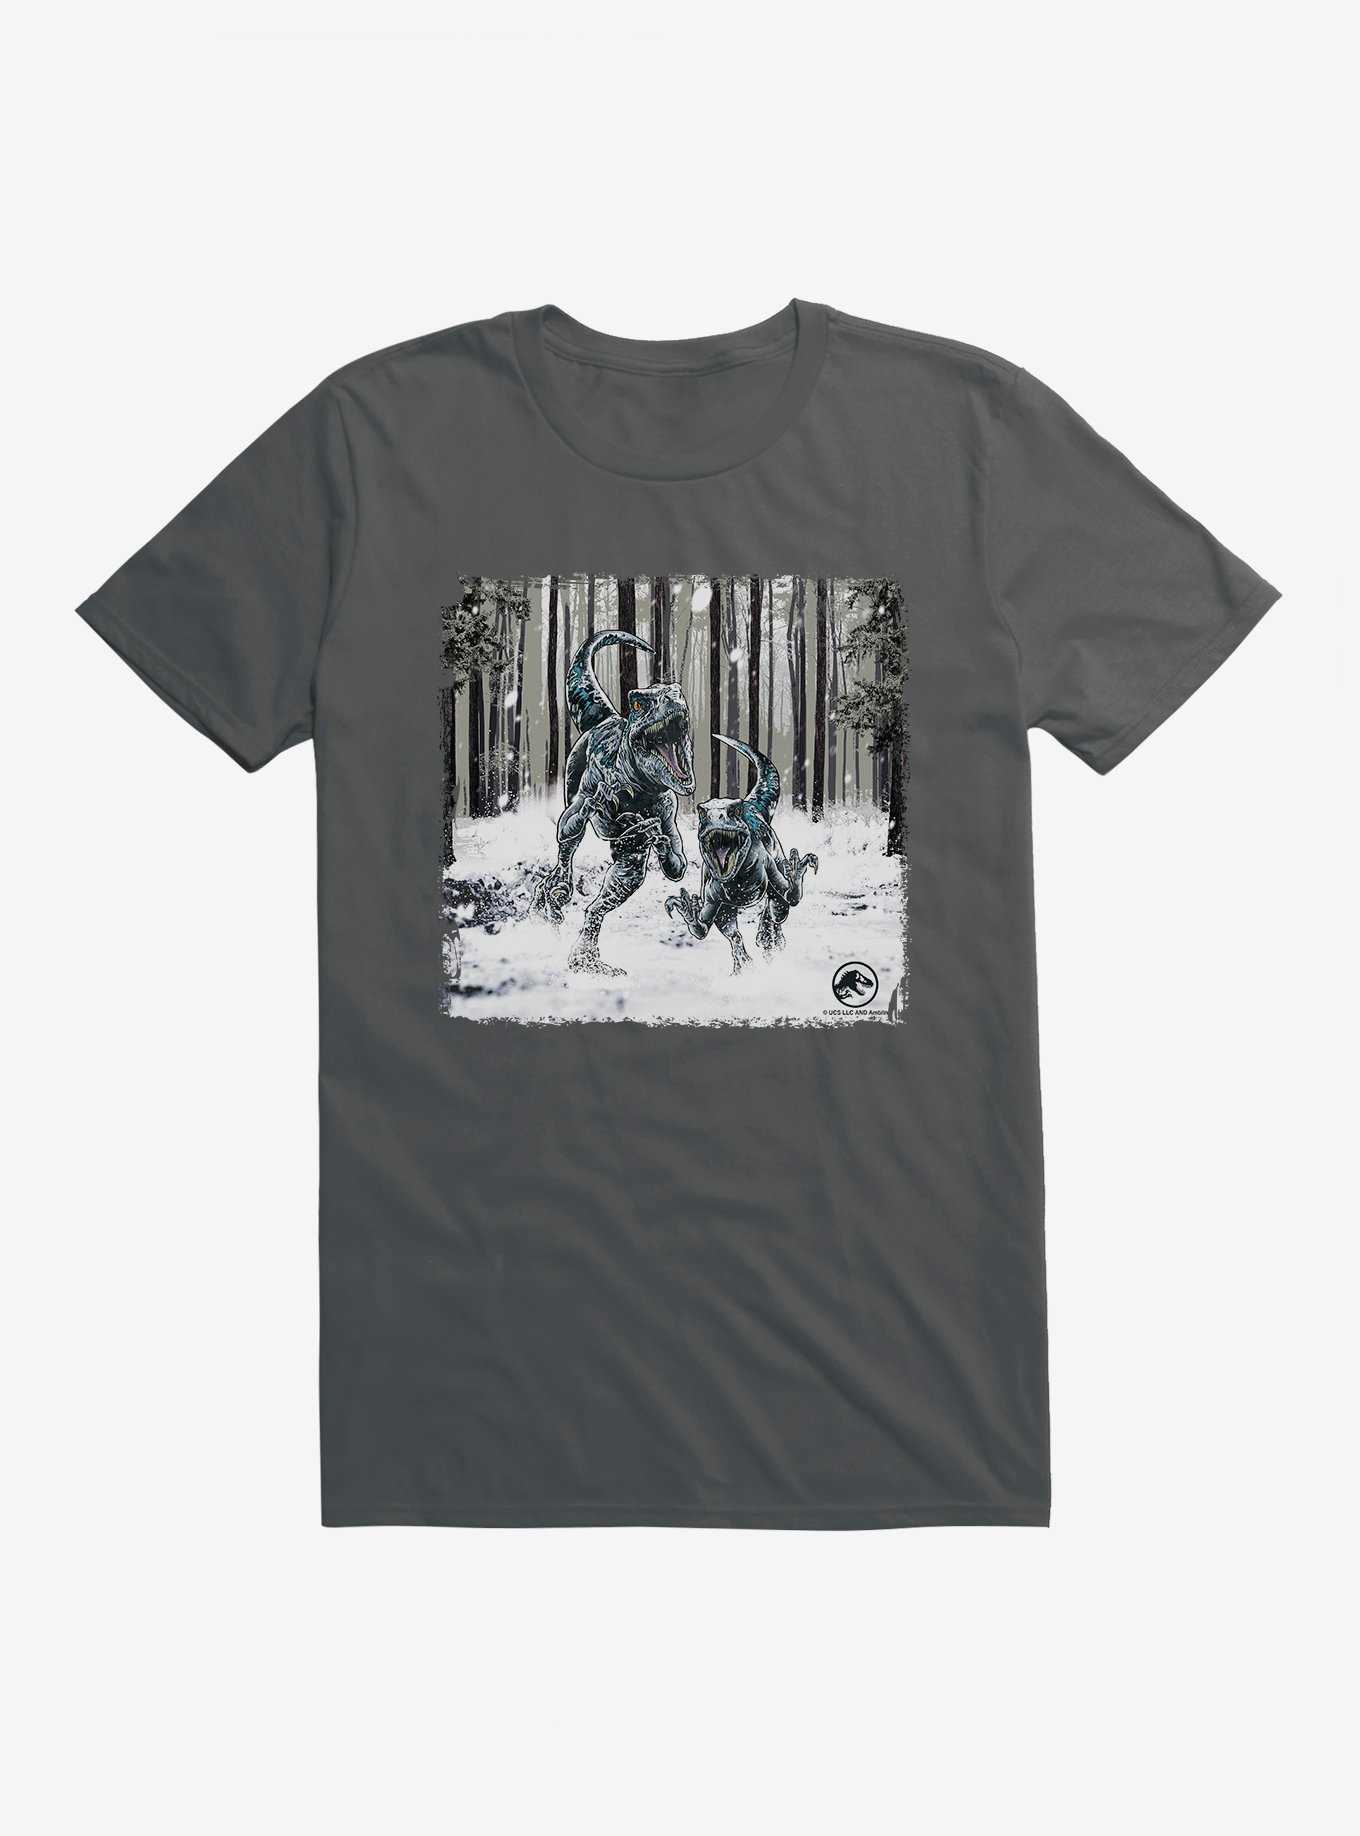 Jurassic World Dominion Forest Hunt T-Shirt, CHARCOAL, hi-res